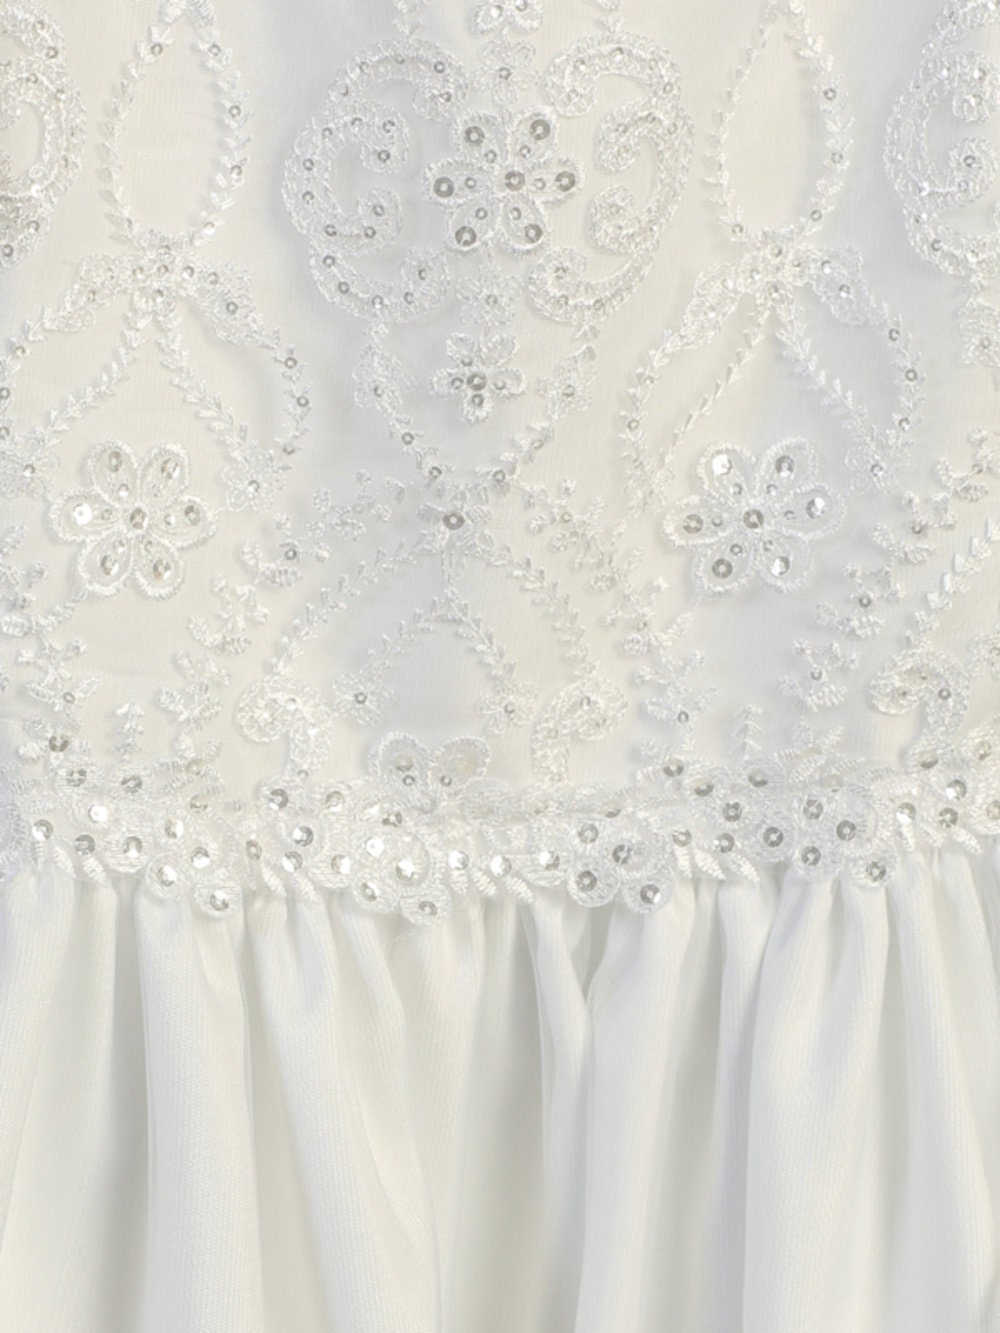 Close-up view of the embroidered lace with sequins on the tulle bodice, showcasing the intricate details.